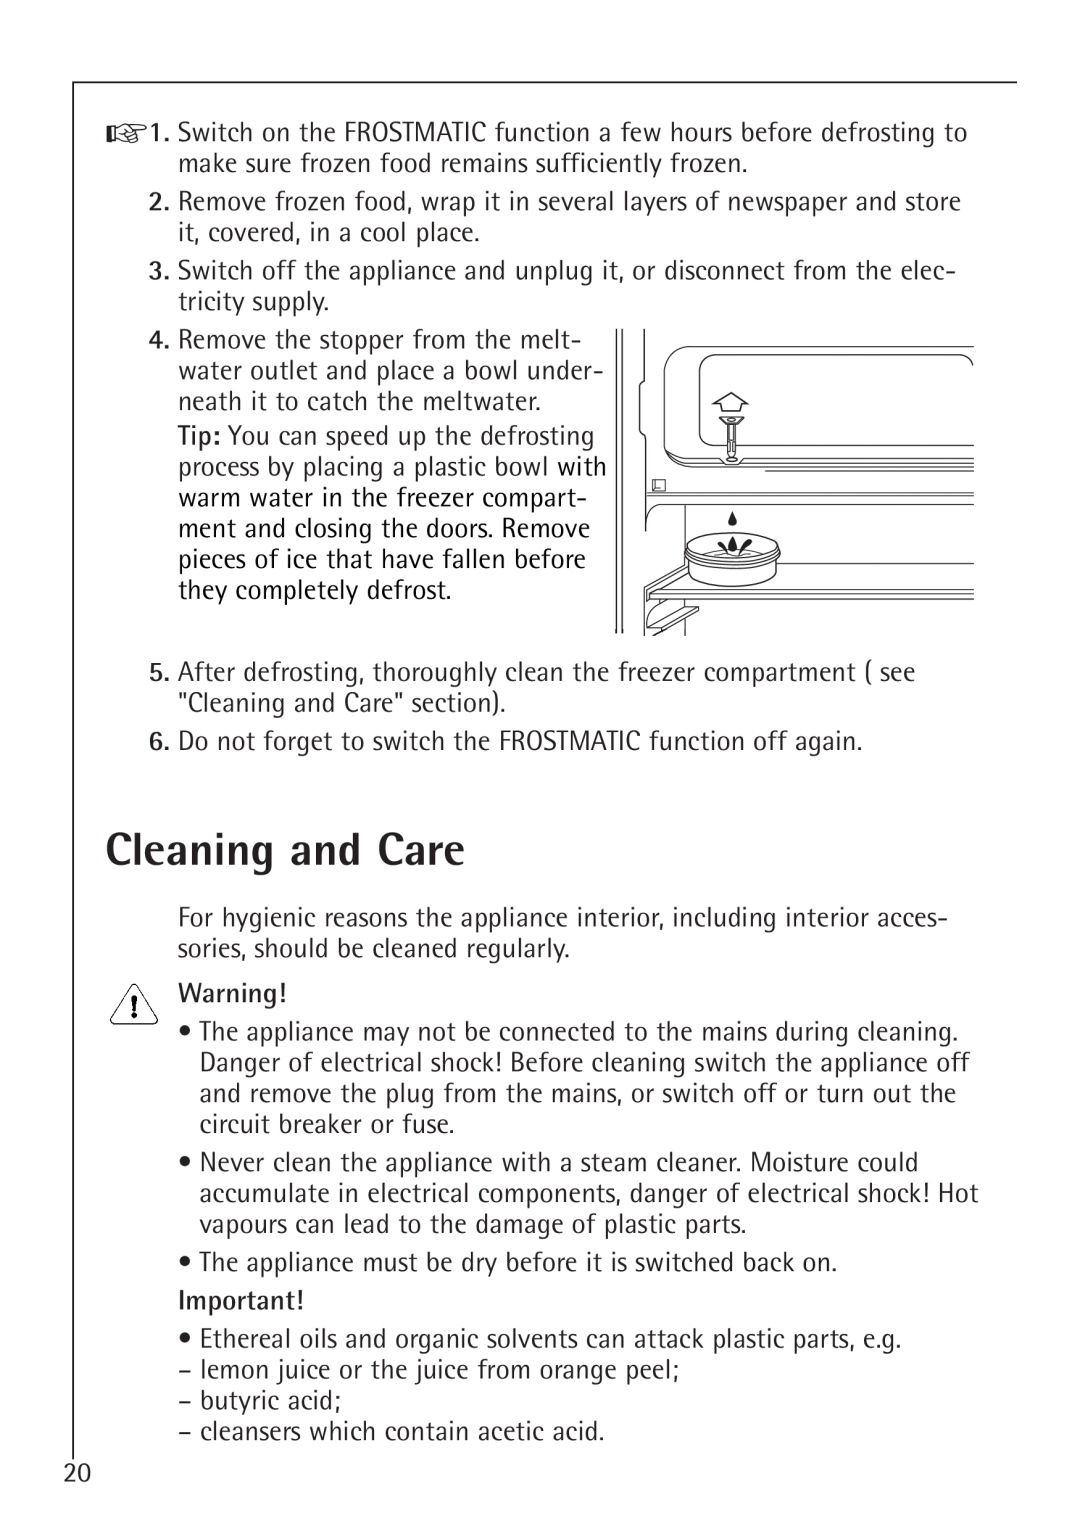 Electrolux K 98840-4 i, K 91240-4 i manual Cleaning and Care 